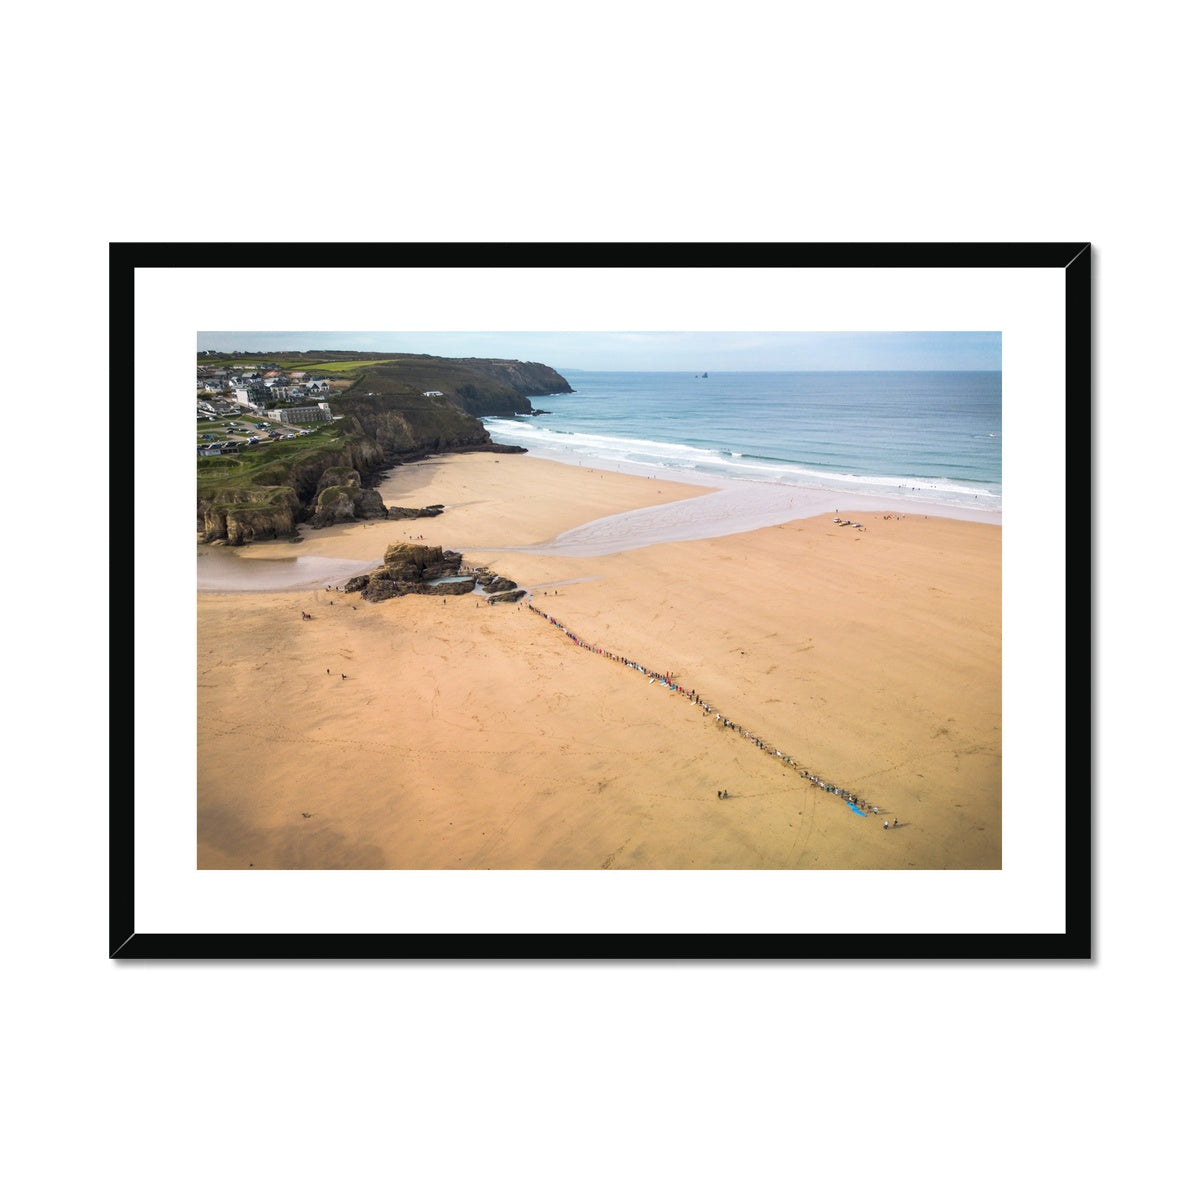 Human Chain Protest Perranporth ~ Framed & Mounted Print